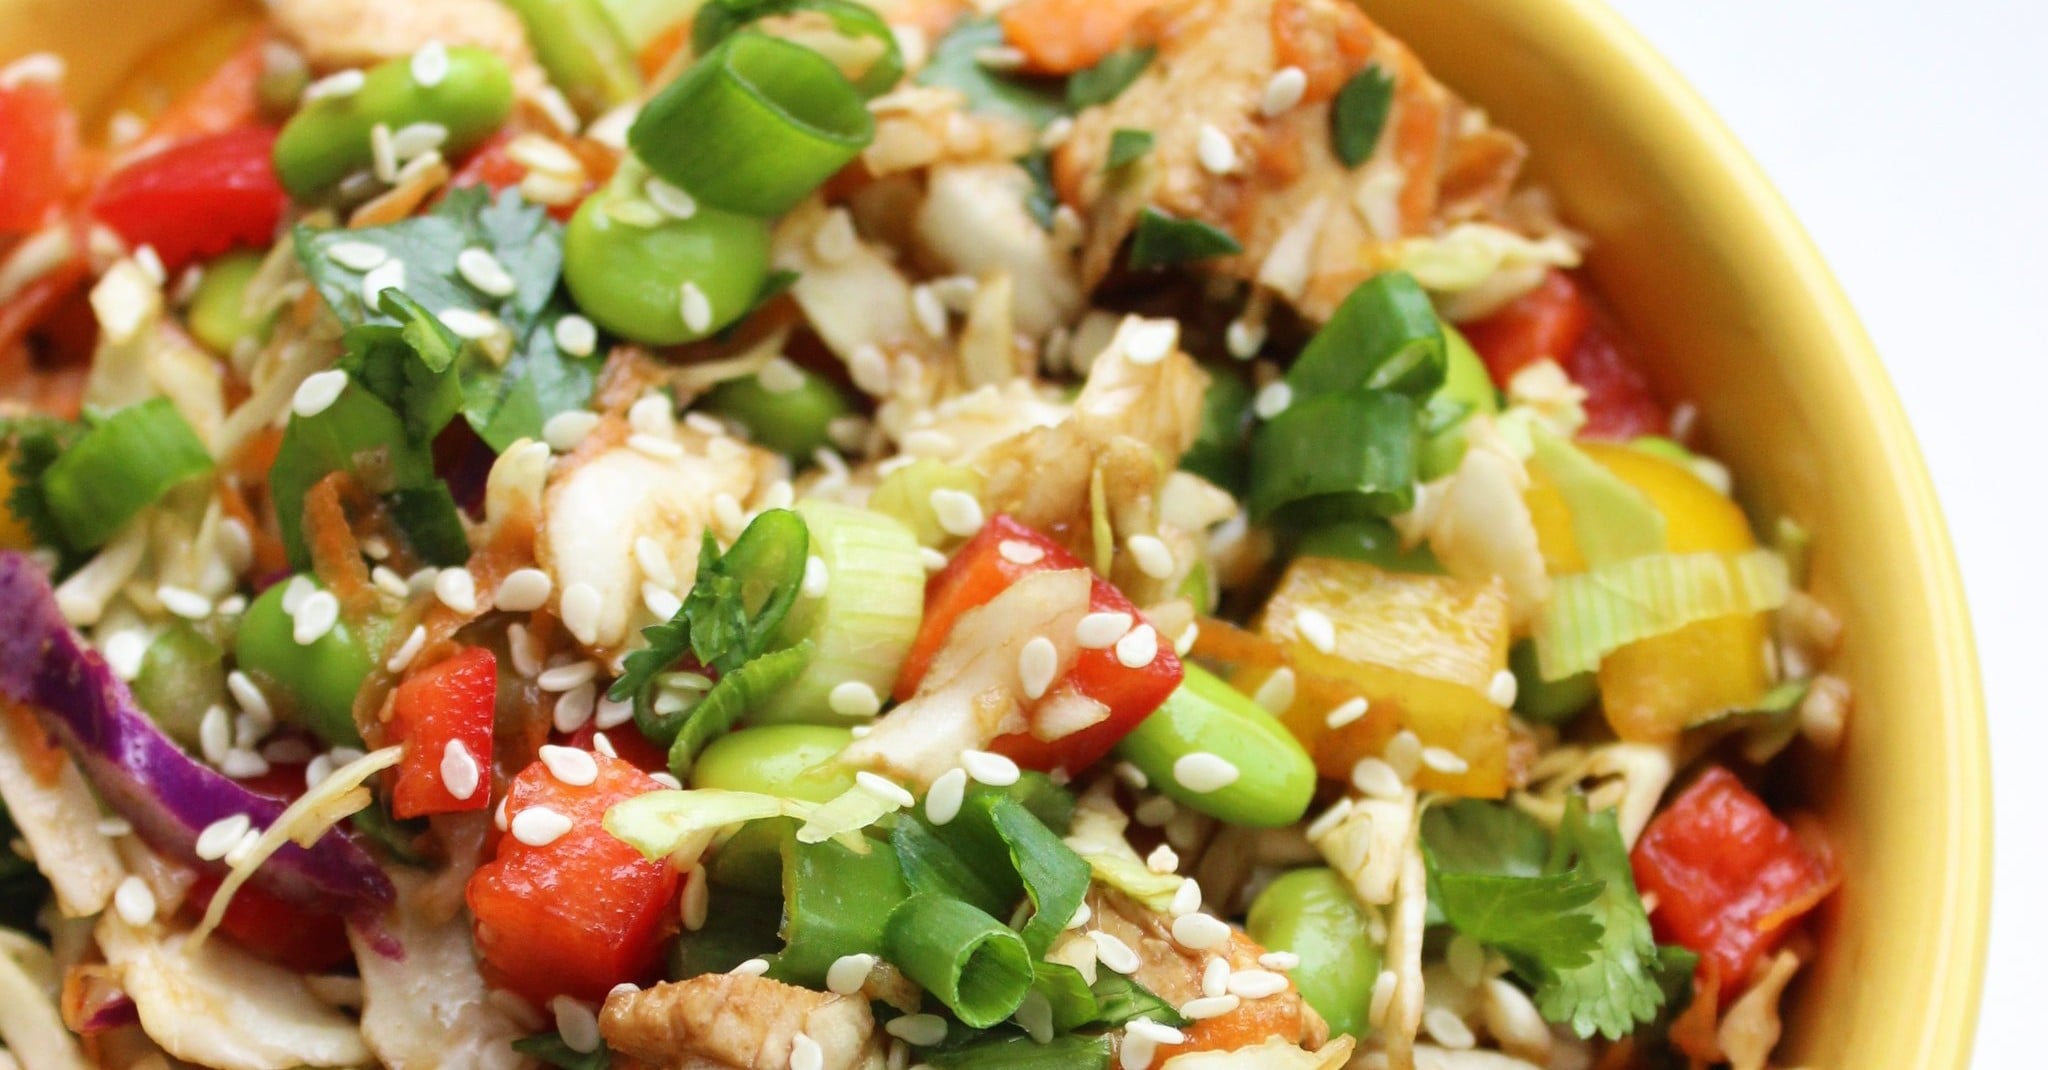 Healthy Chinese Food Recipes | POPSUGAR Fitness